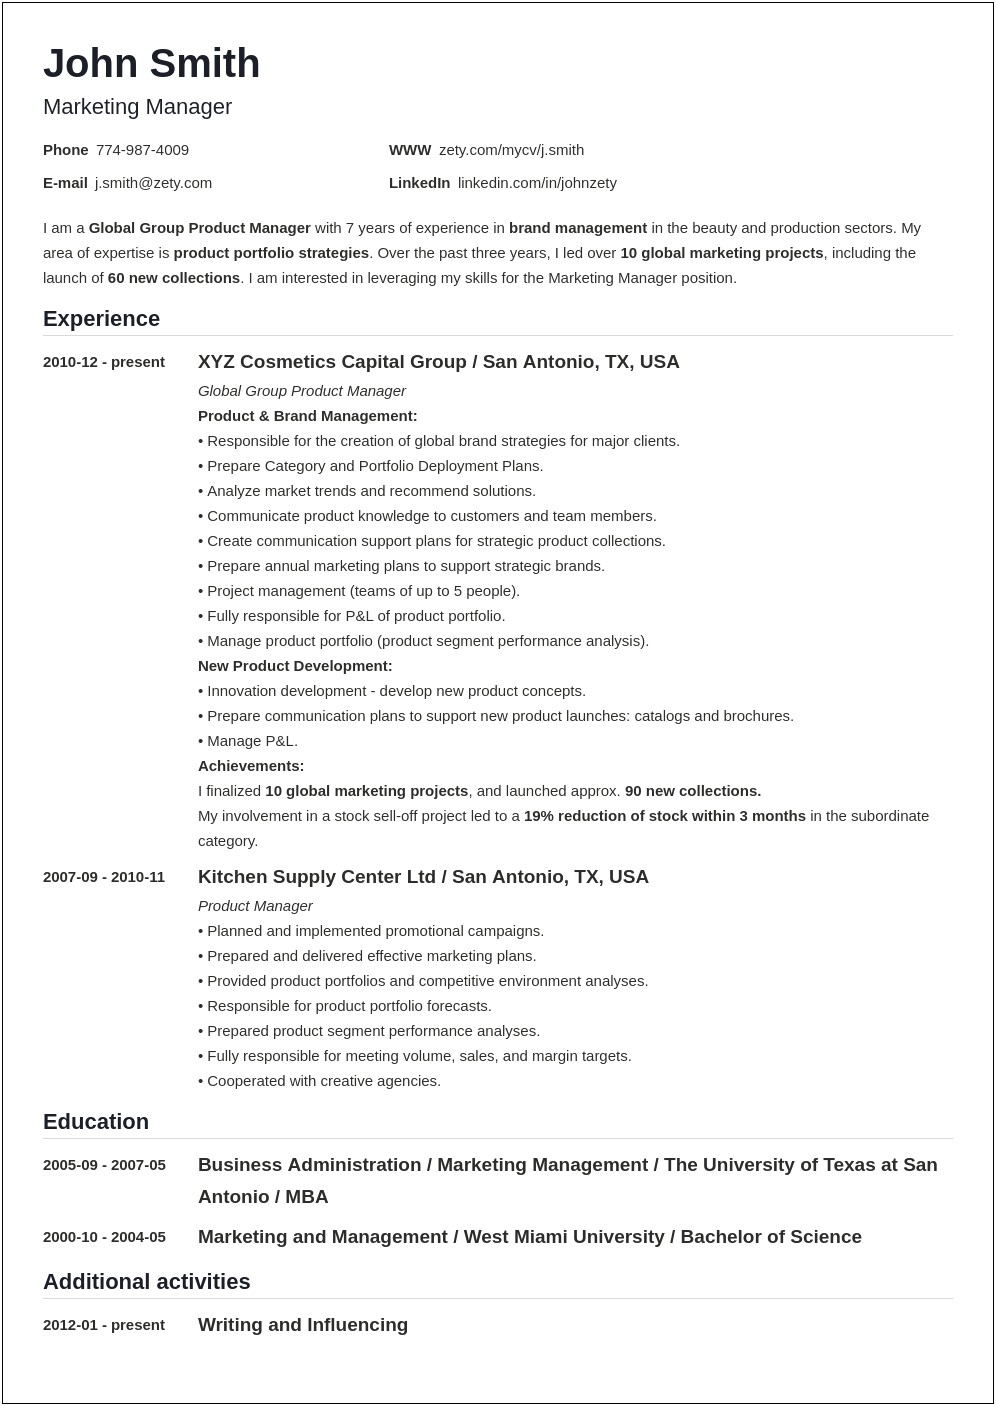 Sample Resumes That Emphasis Educational Credentials